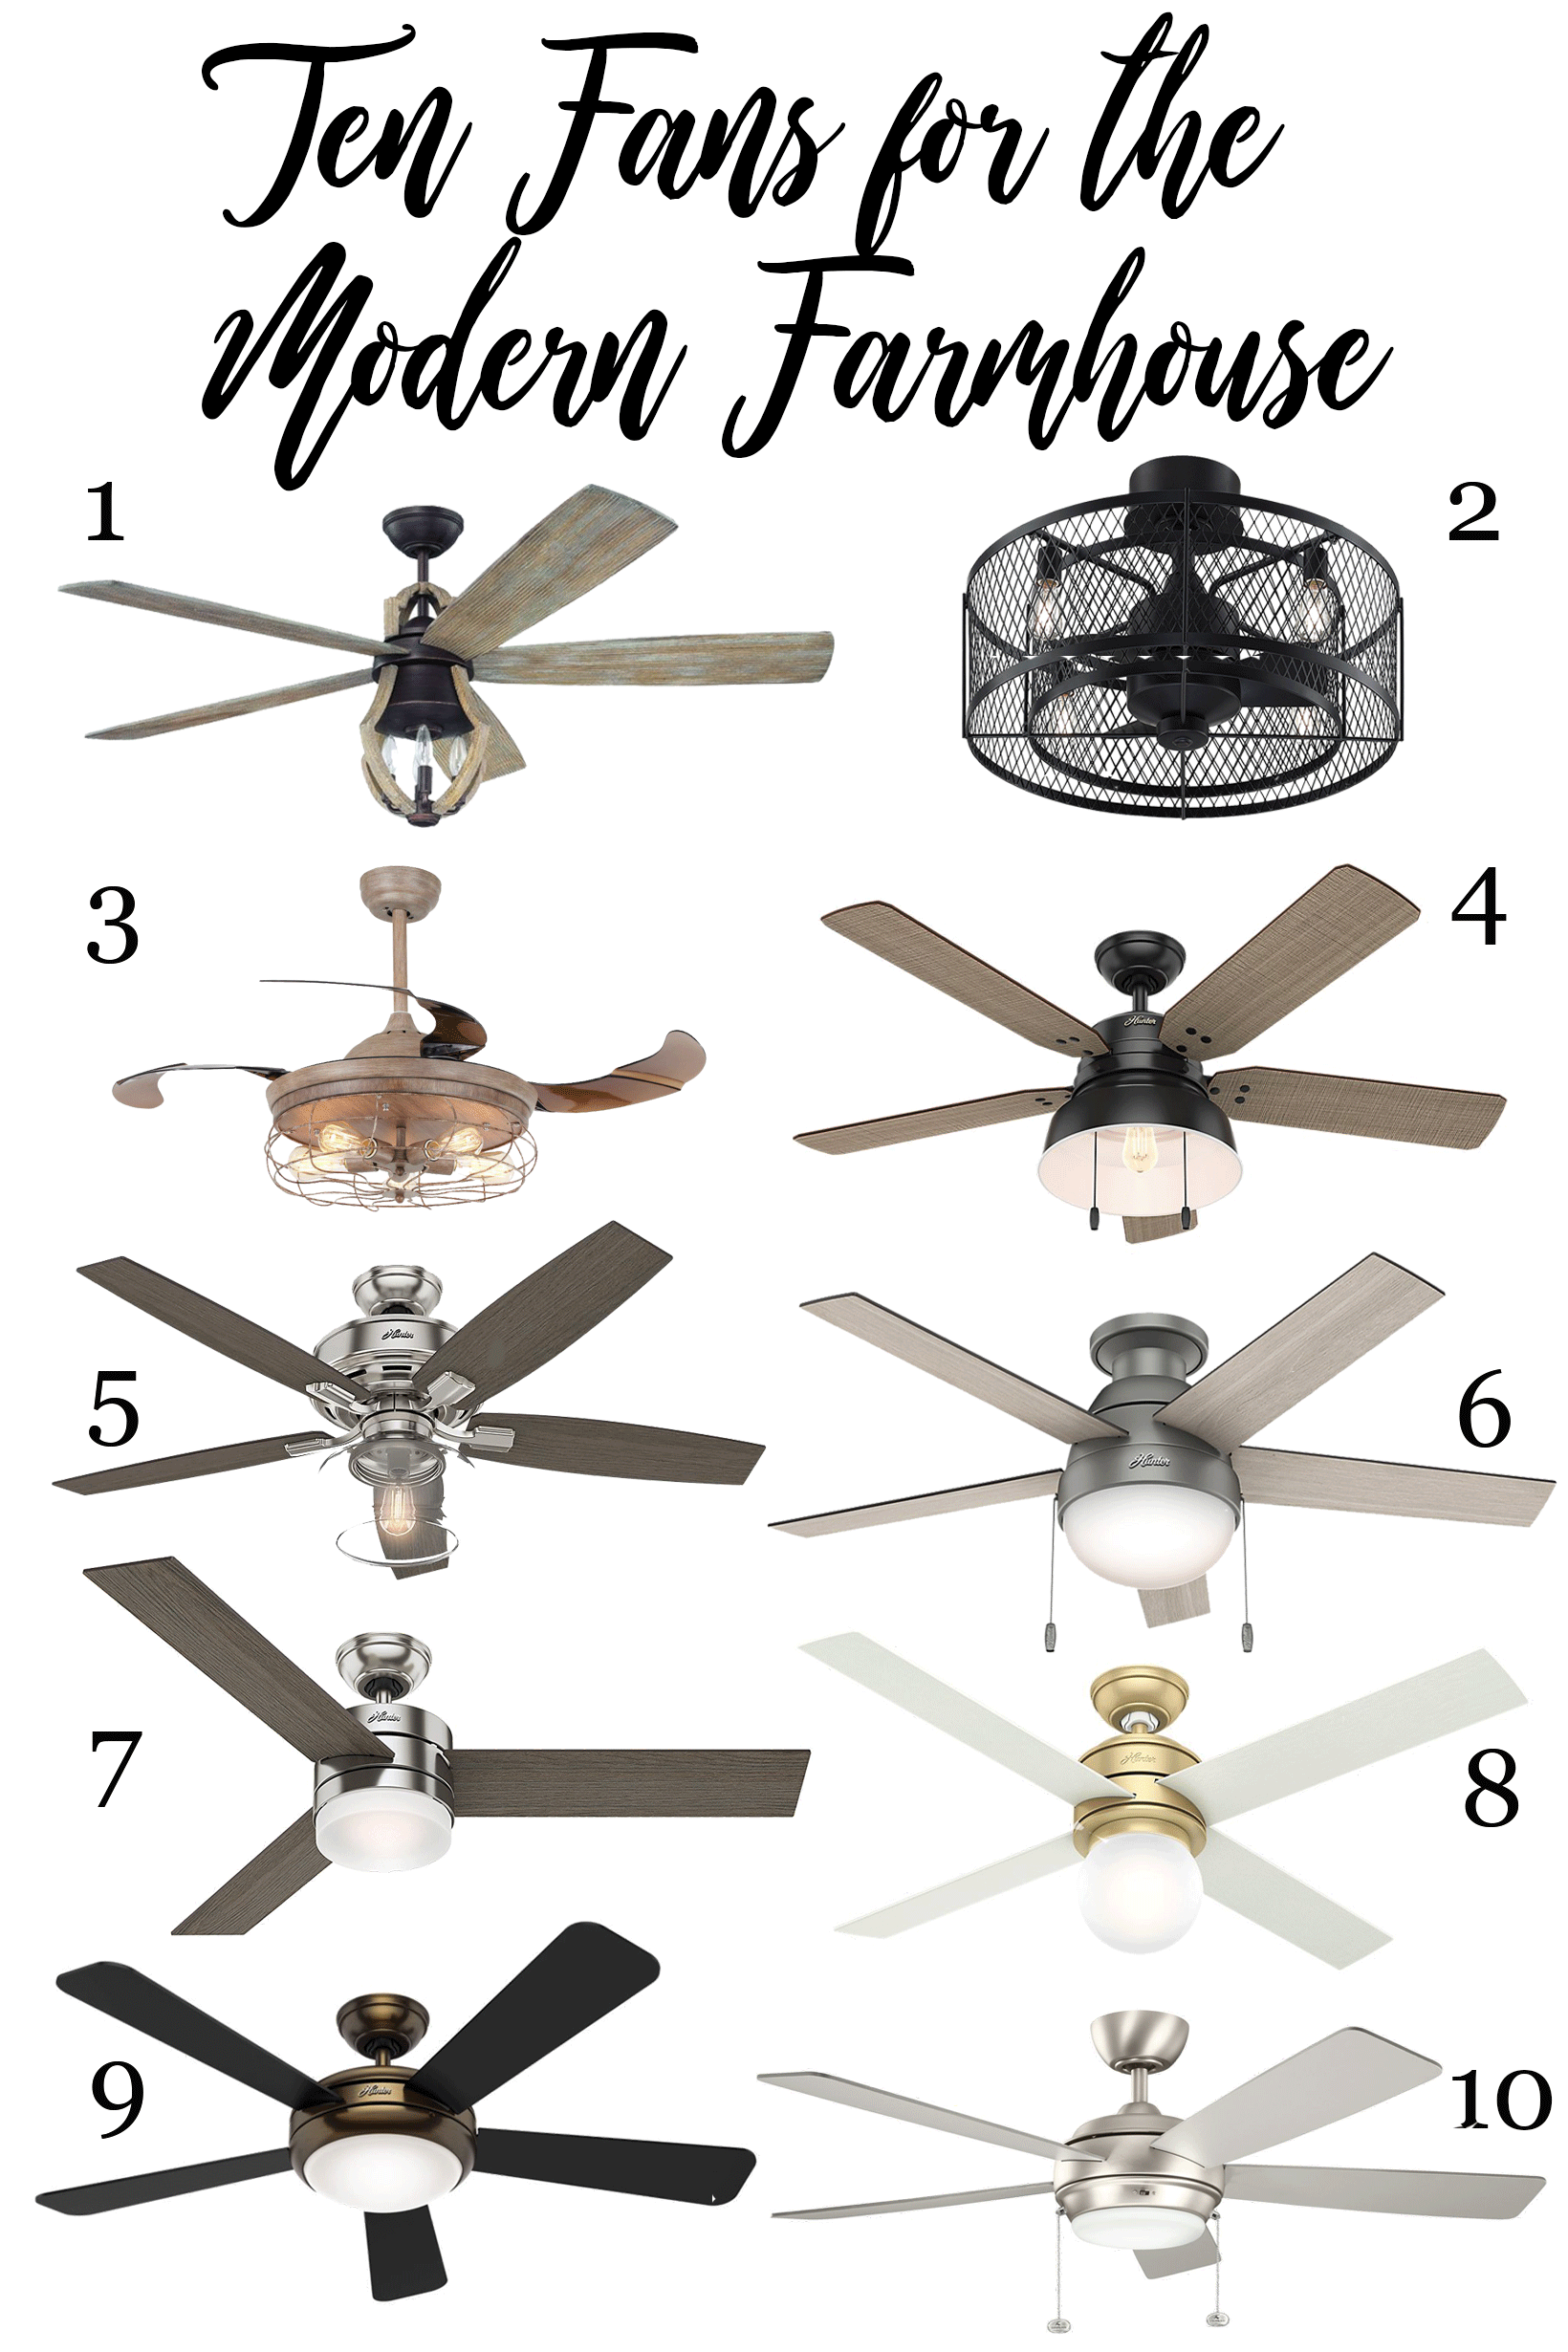 Ten Fans for the Modern Style Farmhouse | While I'm not a fan of how typical cei...